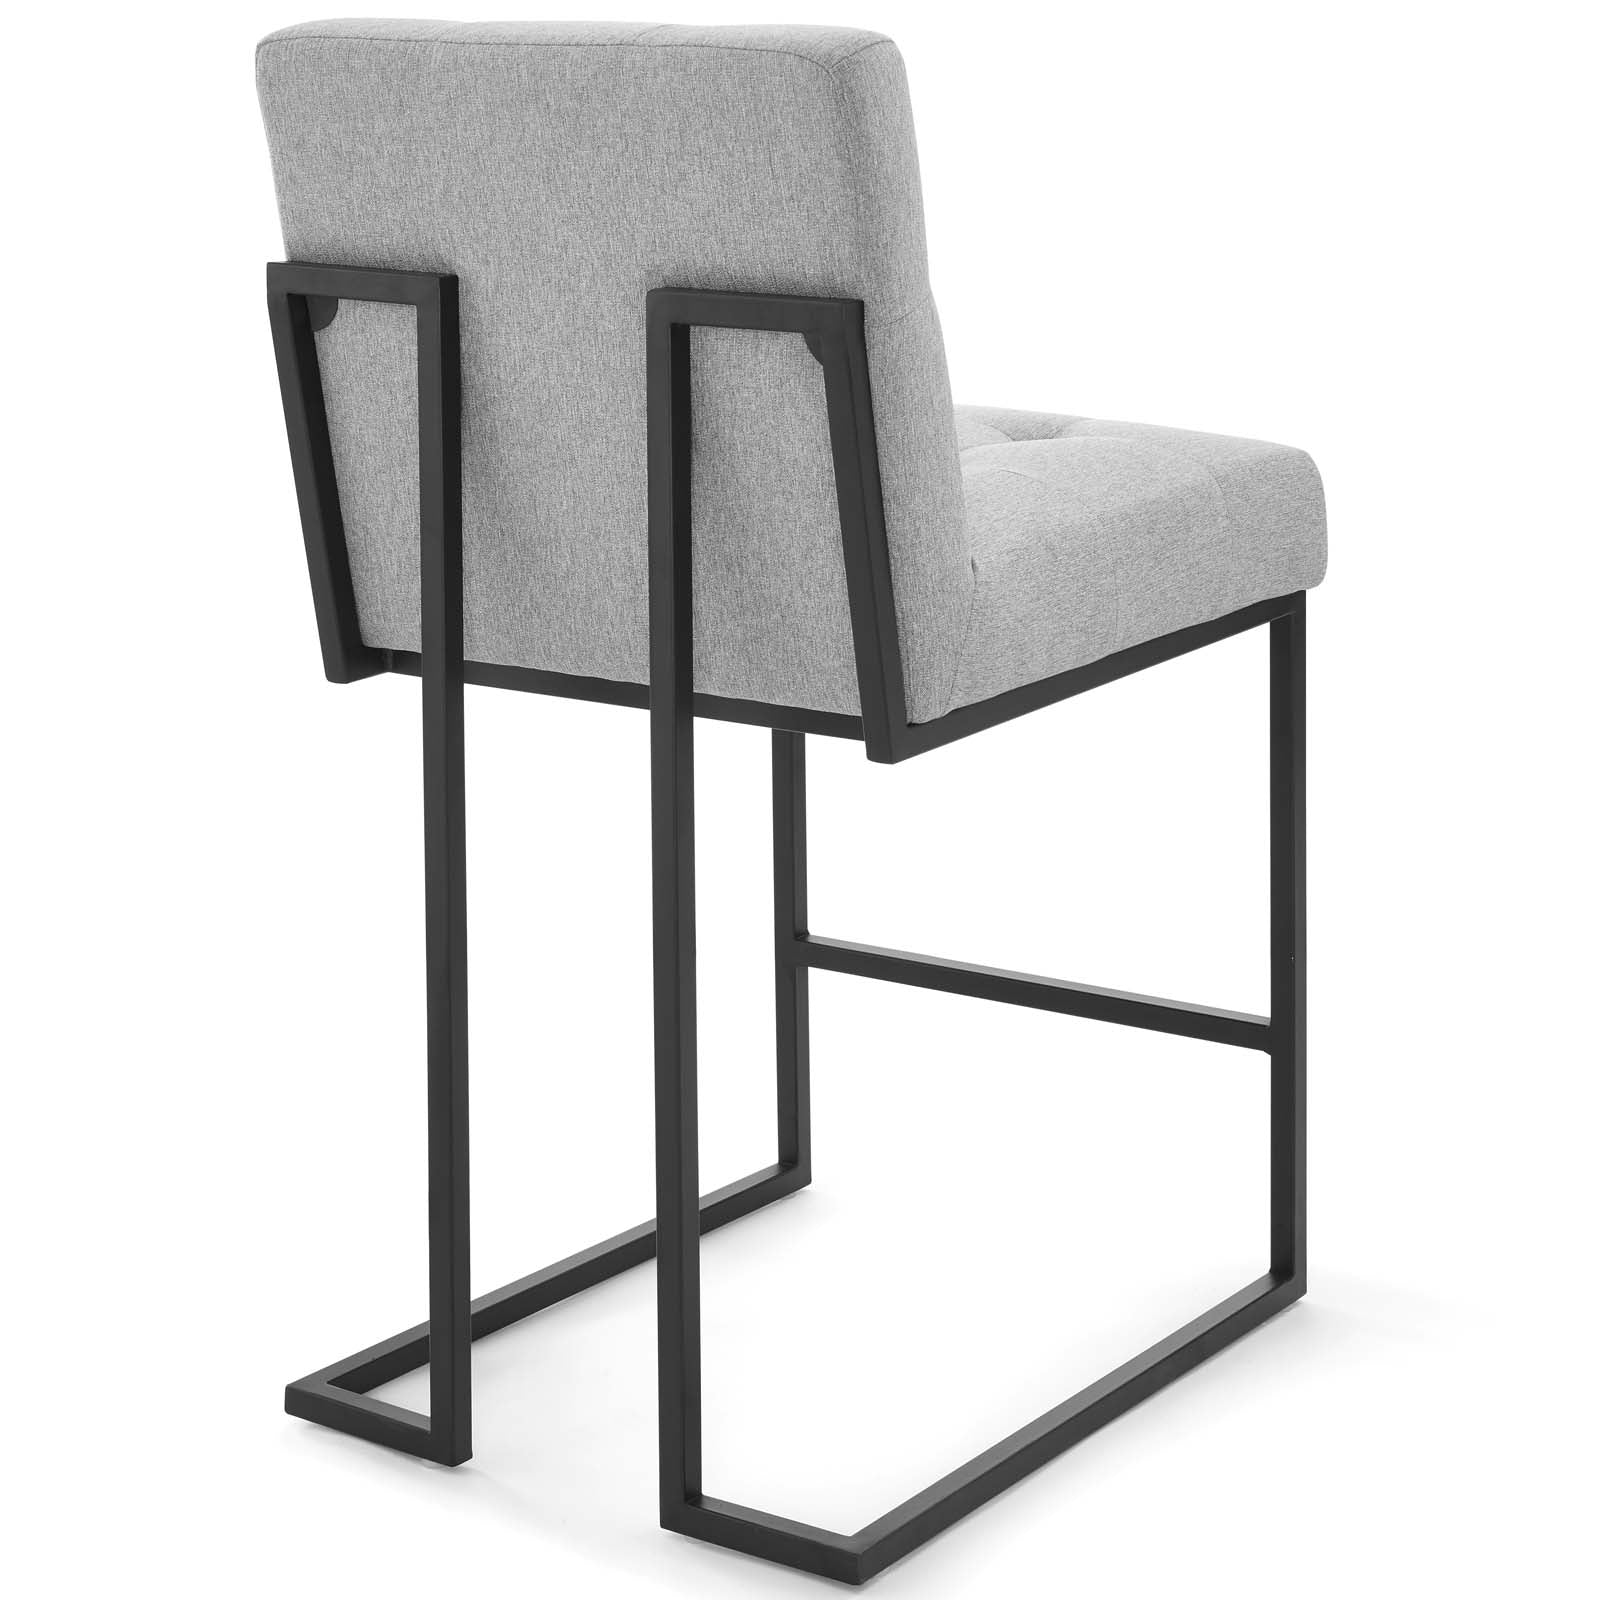 Privy Black Stainless Steel Upholstered Fabric Counter Stool - East Shore Modern Home Furnishings